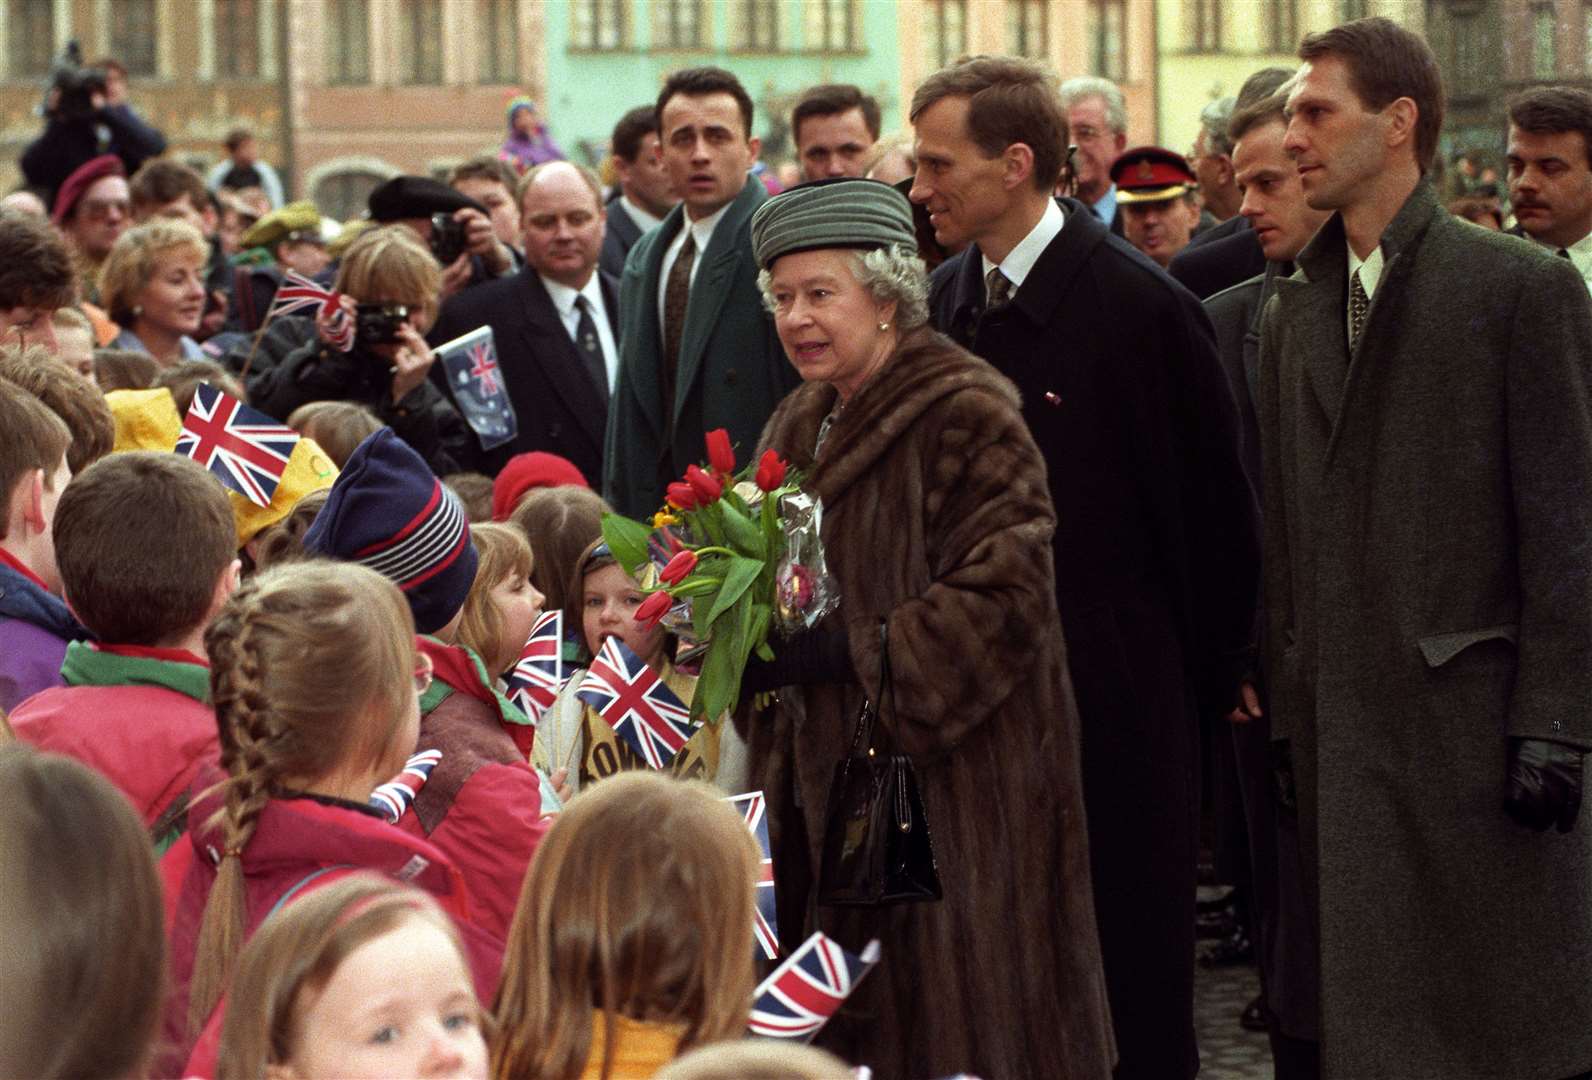 The then Queen receives a warm welcome and flowers from schoolchildren during a walkabout in the old town square, Warsaw in 1996 (John Stillwell/PA)